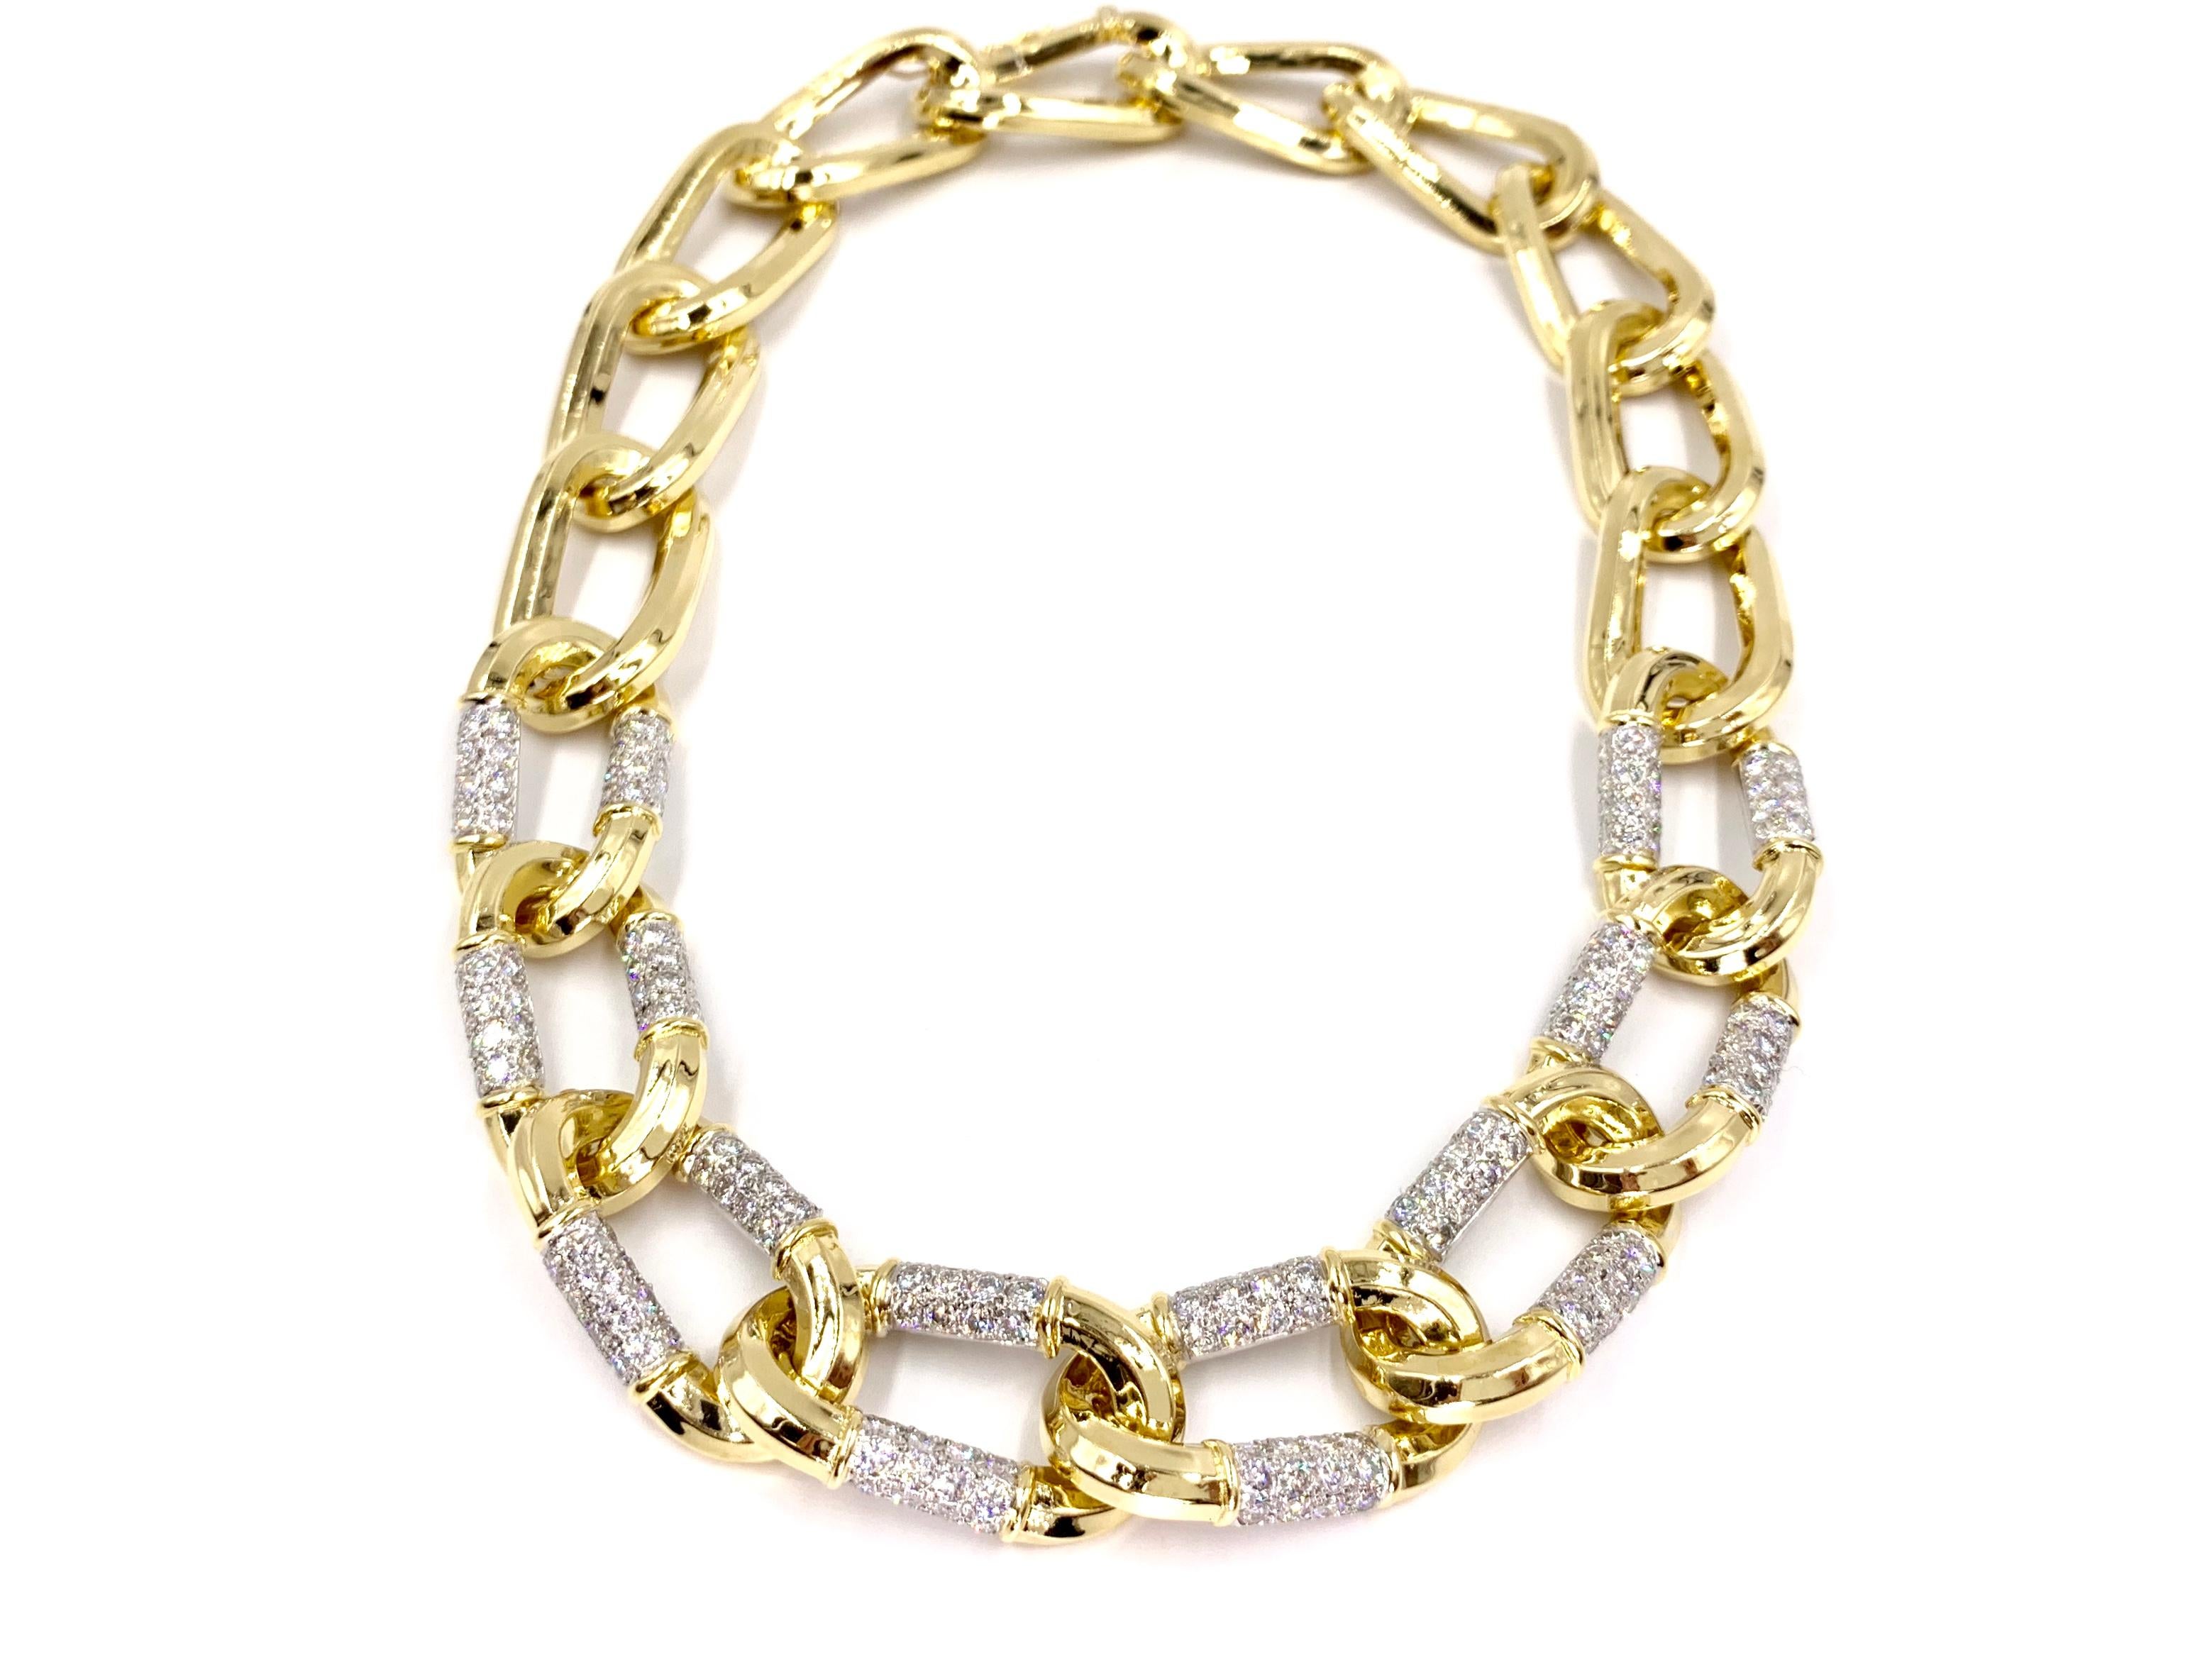 Heavy and substantial 18 karat yellow gold and platinum large interlocking oval link necklace featuring 192 round brilliant diamonds at 10.66 carats total weight. High quality diamonds are extremely brilliant at approximately E-F color, VVS1-VVS2